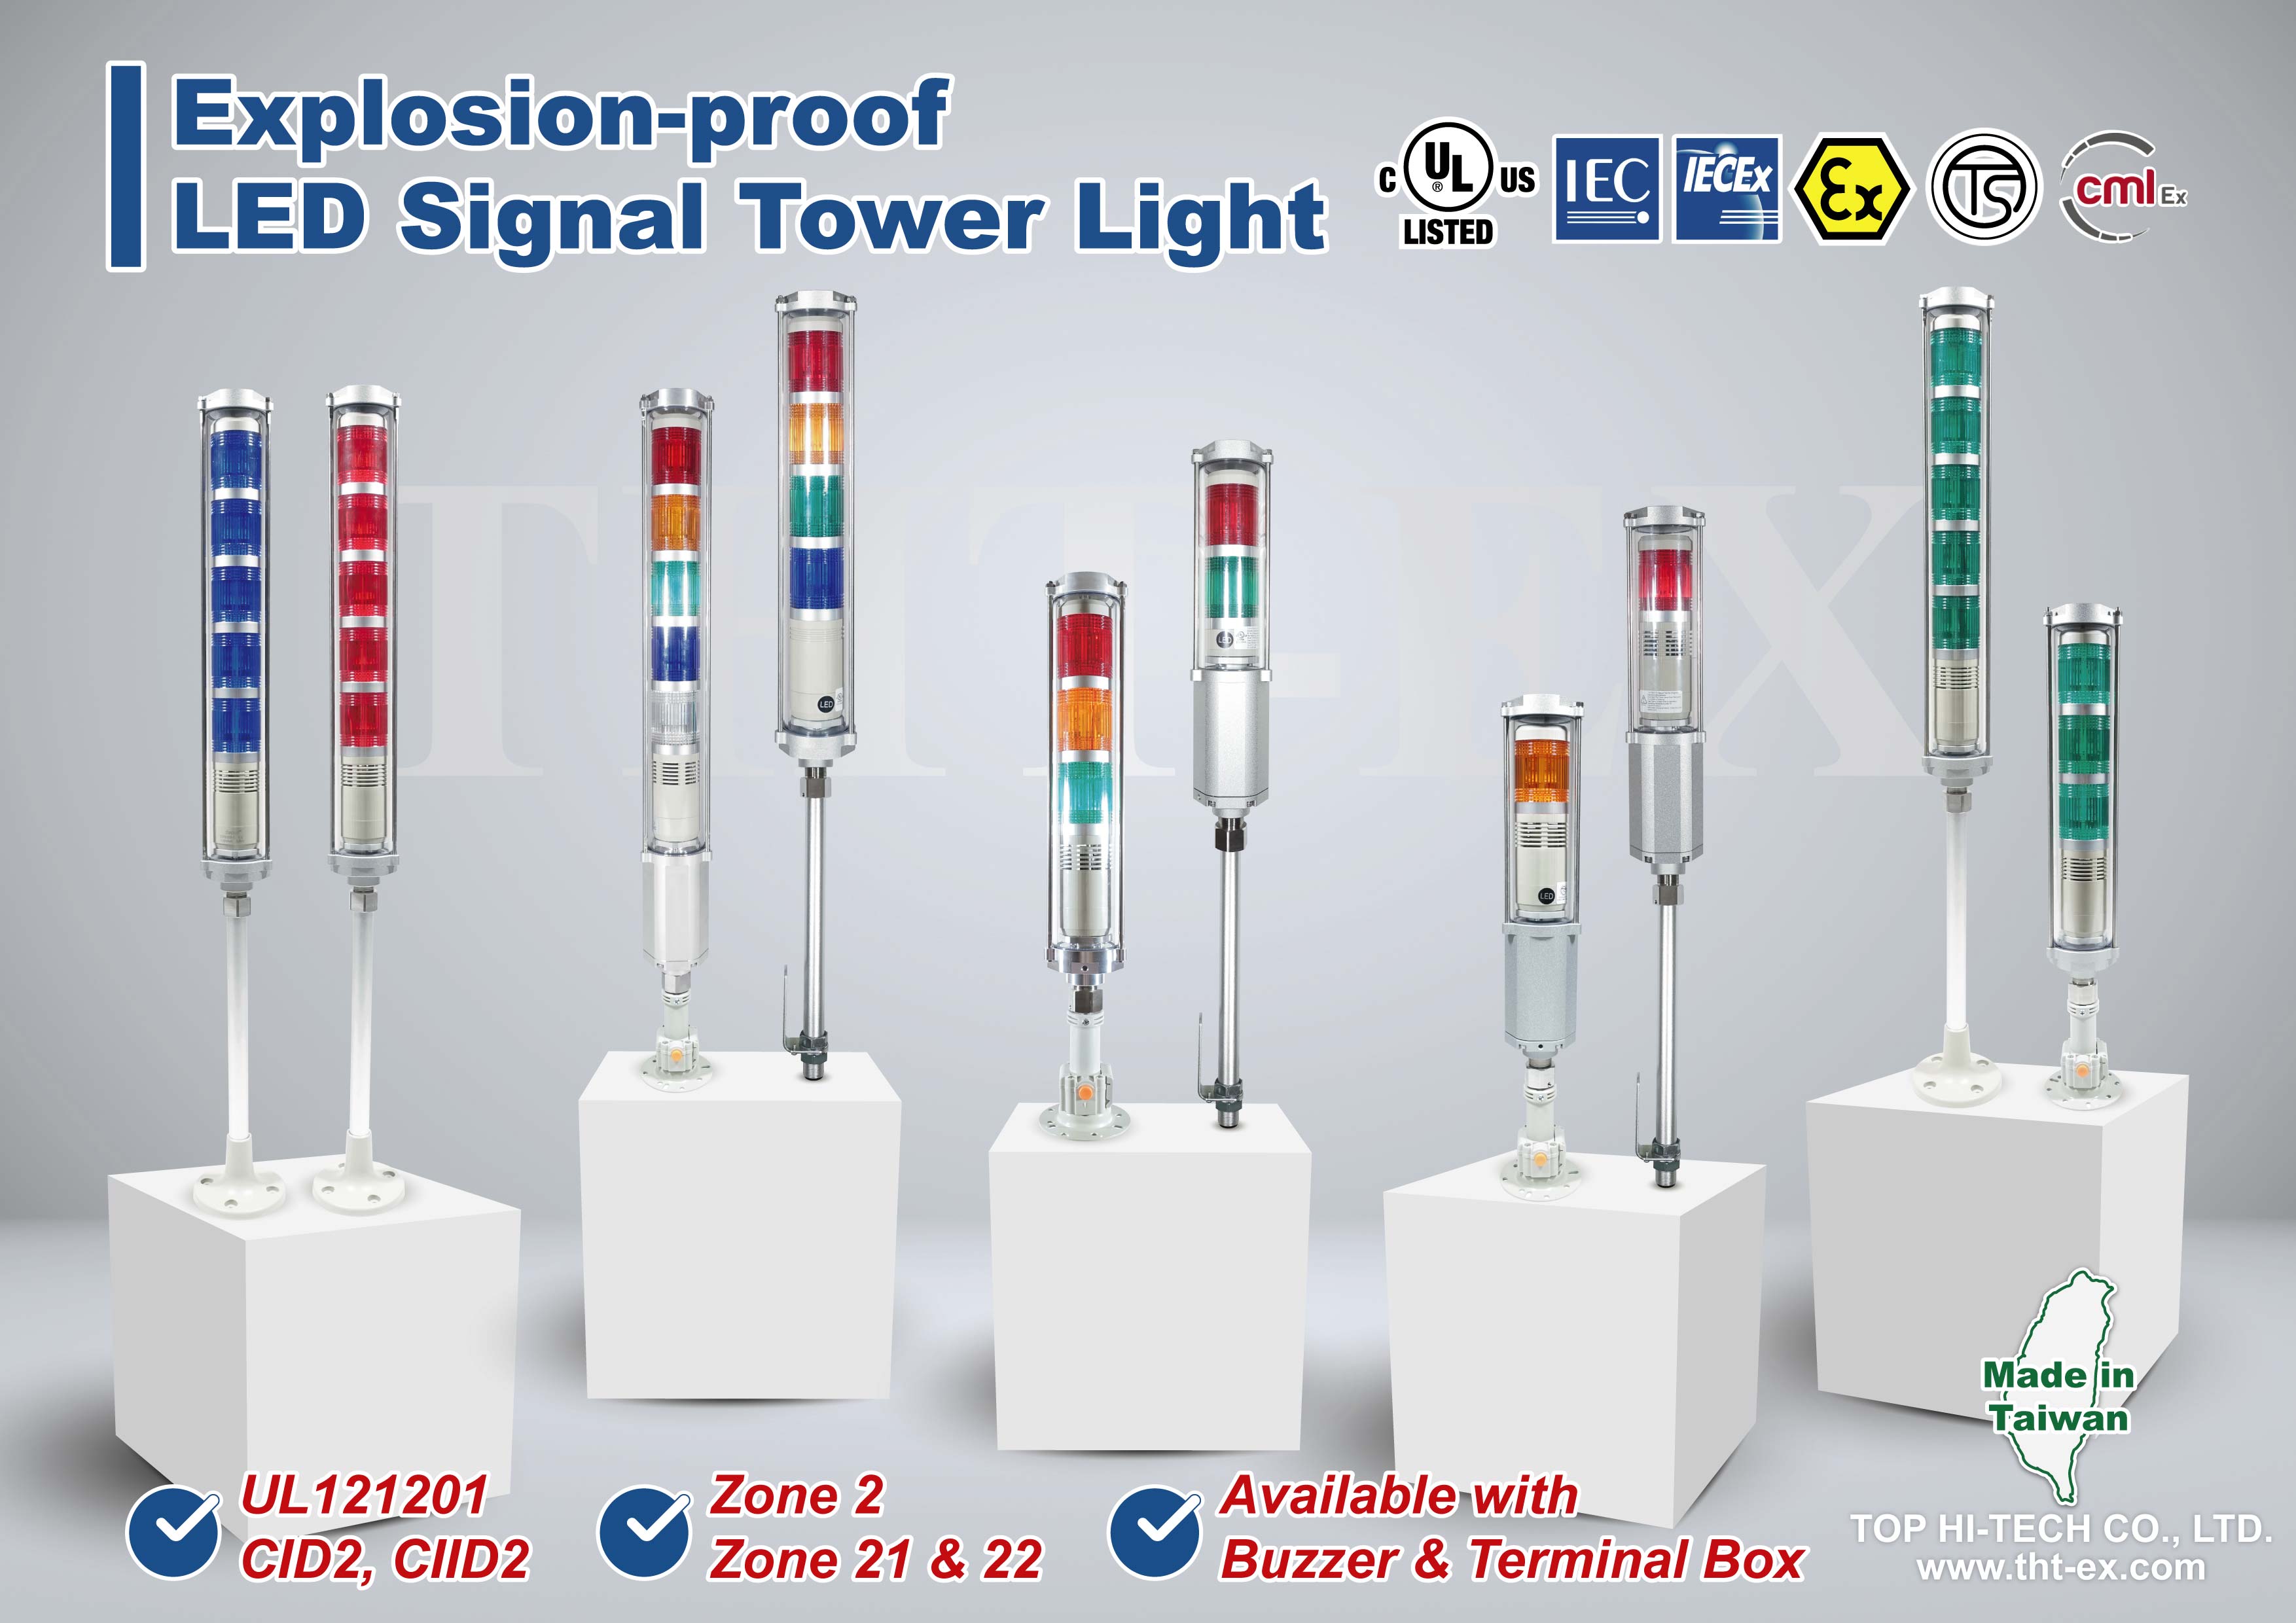 The Application of THT-EX Explosion-proof Signal Tower Light, All Up to You!